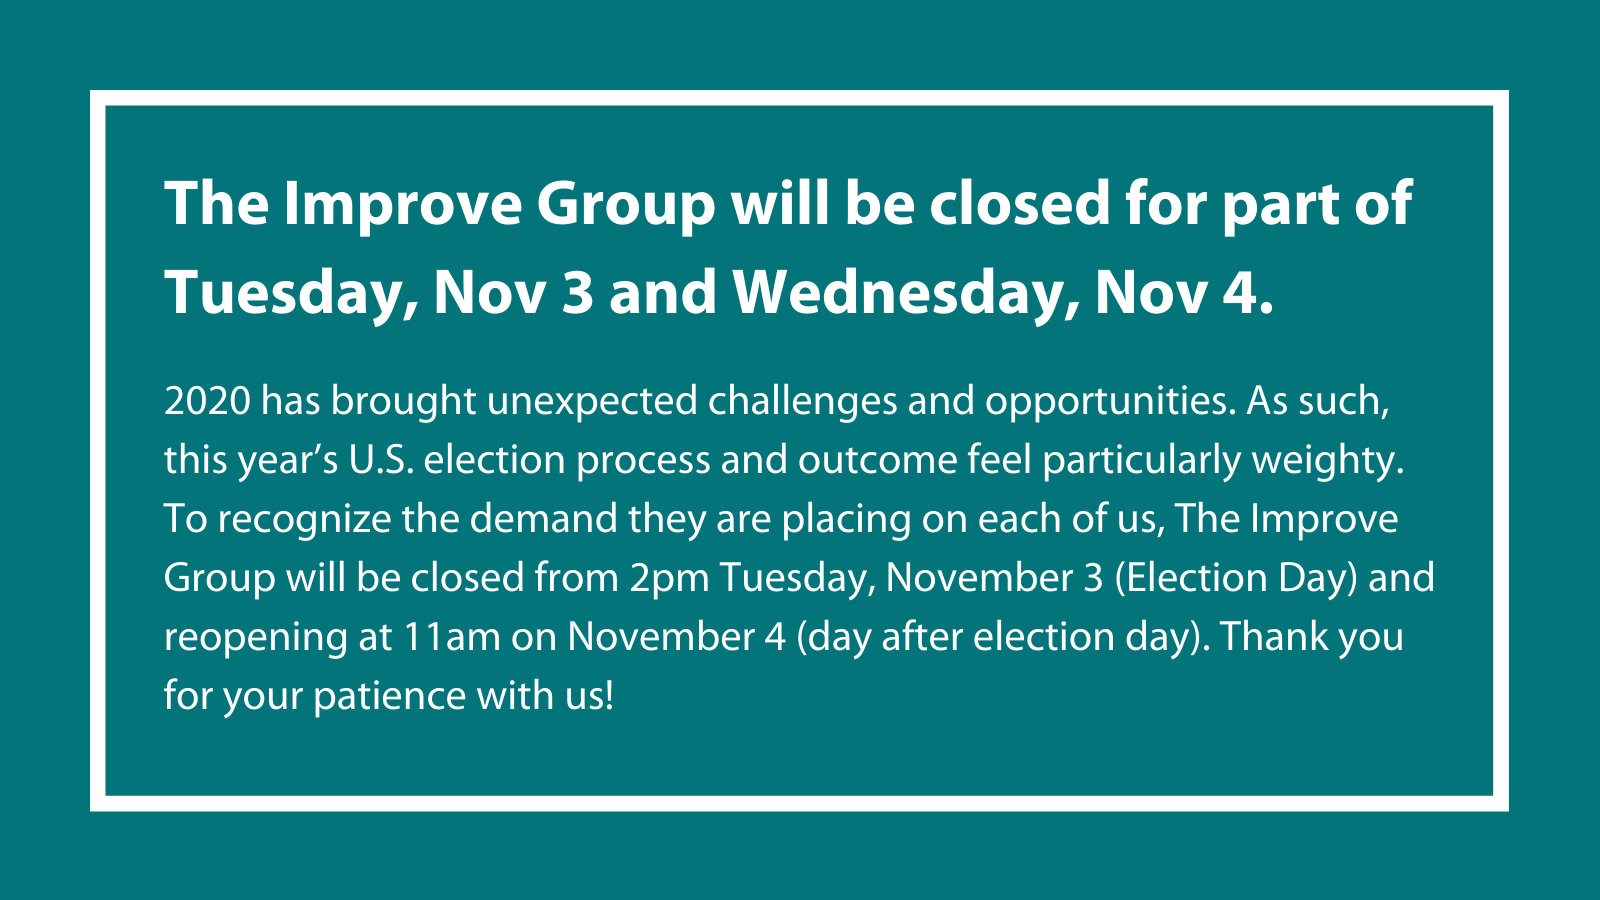 The Improve Group will be closed for part of Tuesday, November 3 and Wednesday, November 4.